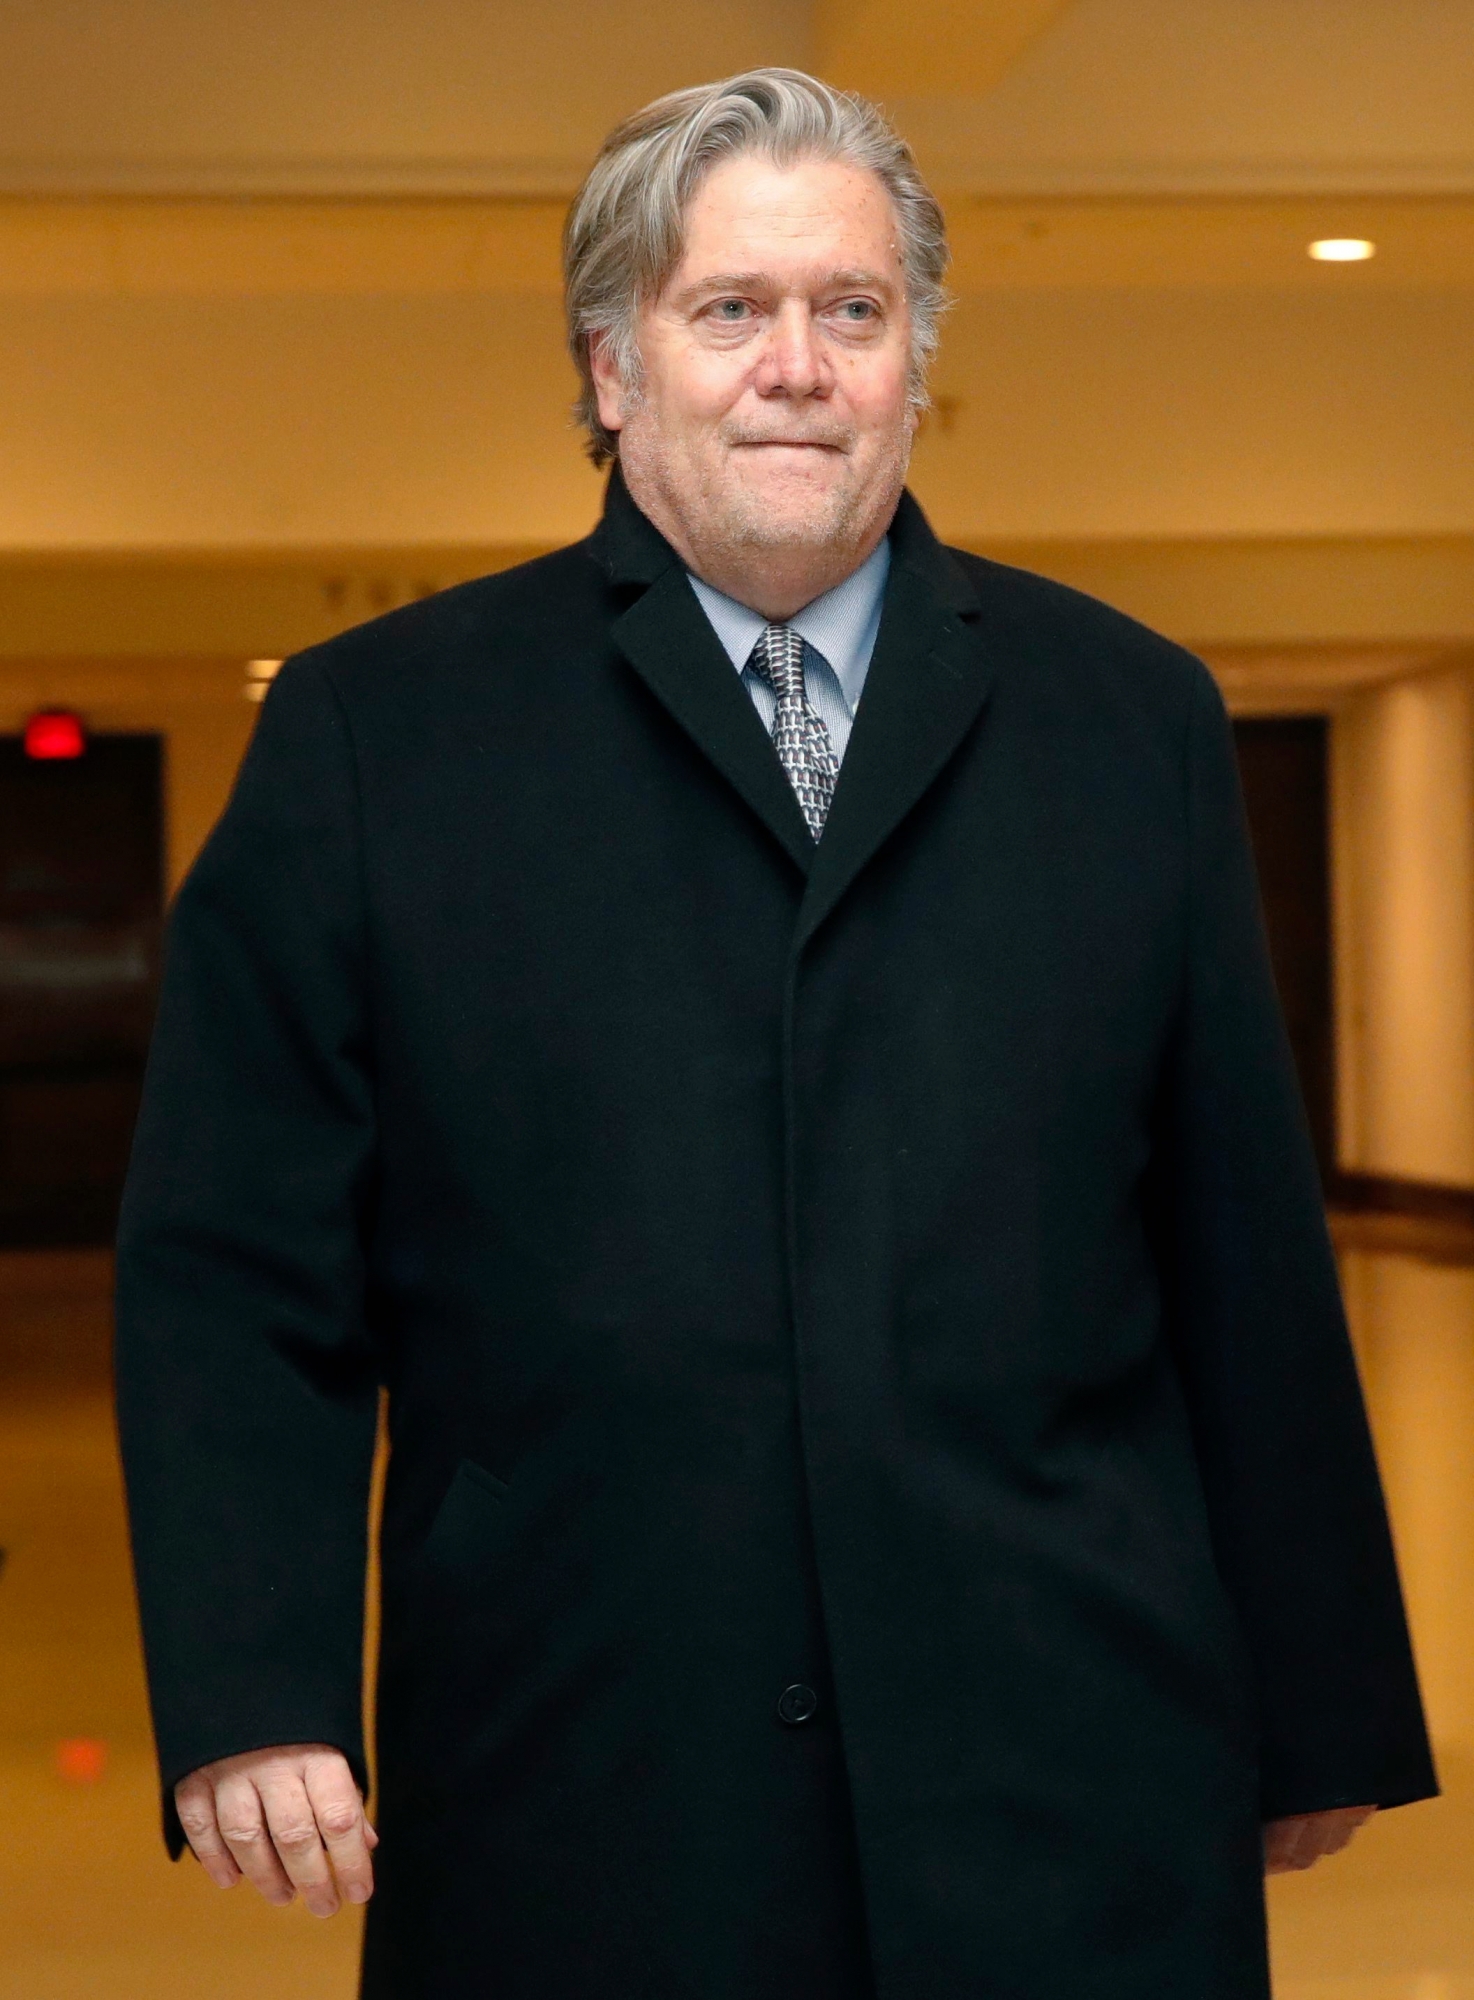 Former White House strategist Steve Bannon leaves a House Intelligence Committee meeting where he was interviewed behind closed doors on Capitol Hill, Tuesday, Jan. 16, 2018, in Washington. (AP Photo/Jacquelyn Martin) Trump Russia Probe